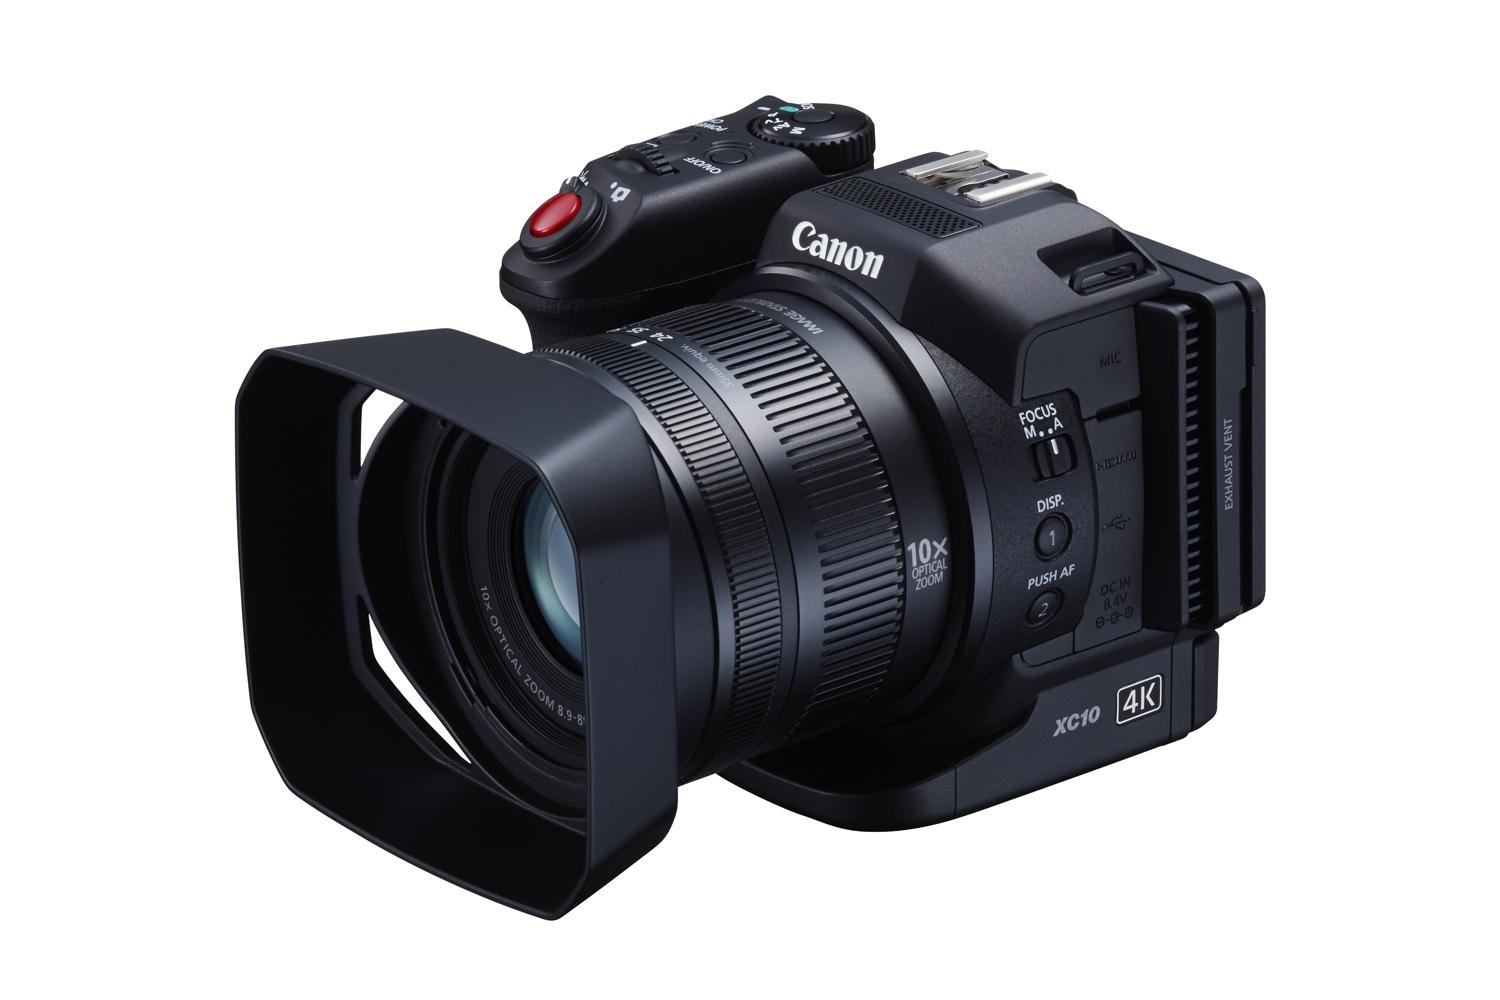 canons new affordable 4k camcorder ideal for budding filmmakers youtube creators canon xc10 1